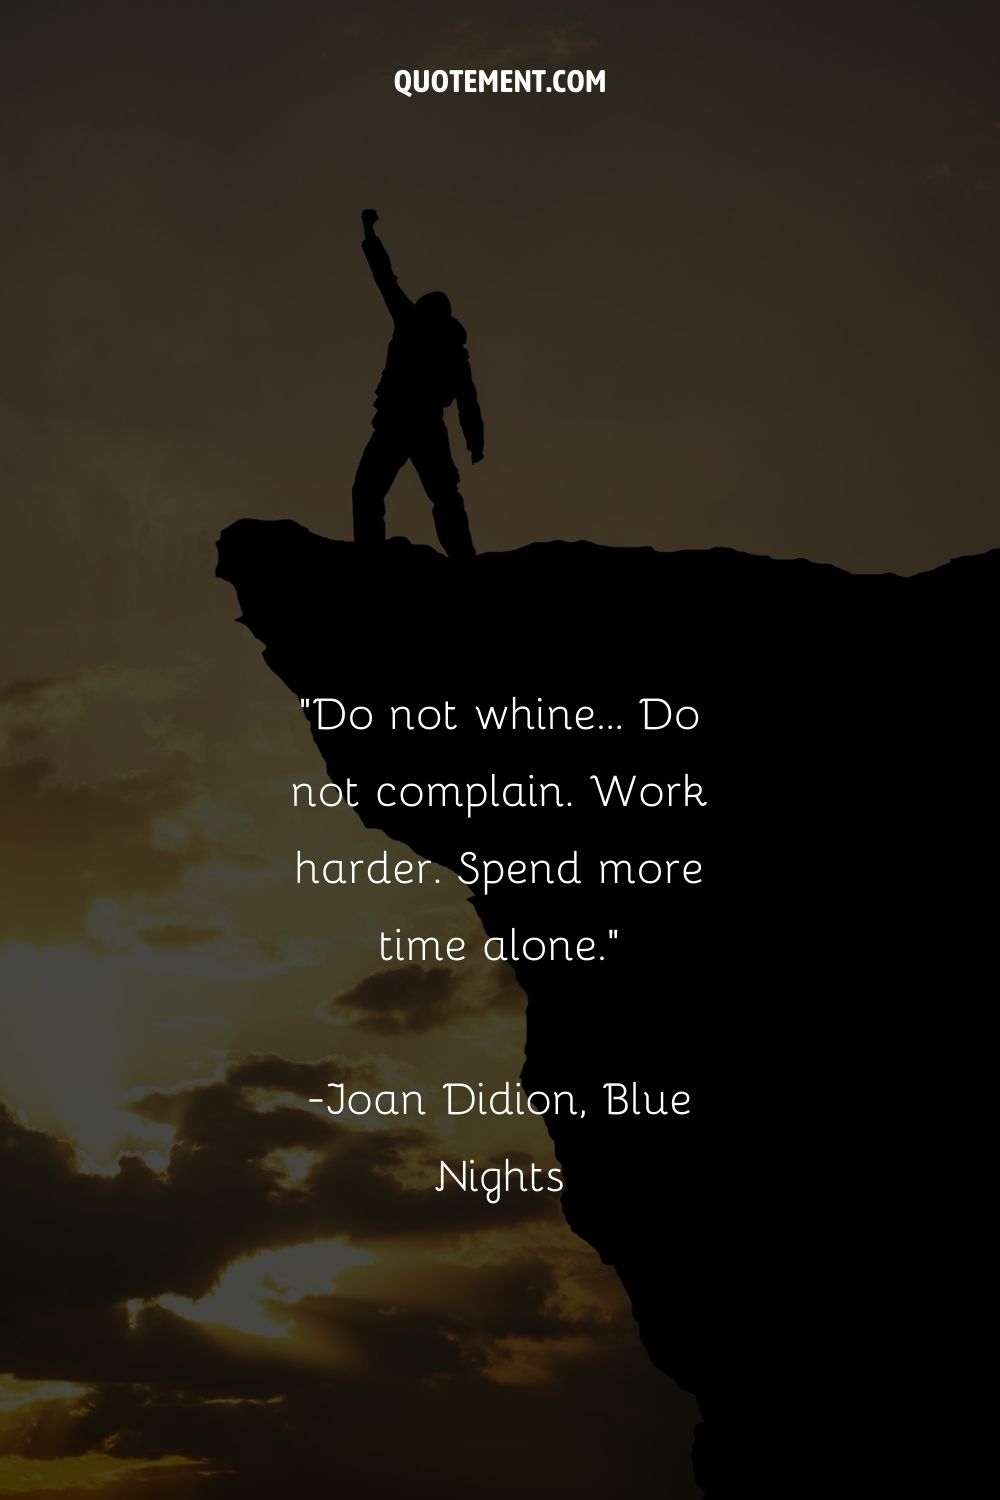 Do not whine... Do not complain. Work harder. Spend more time alone